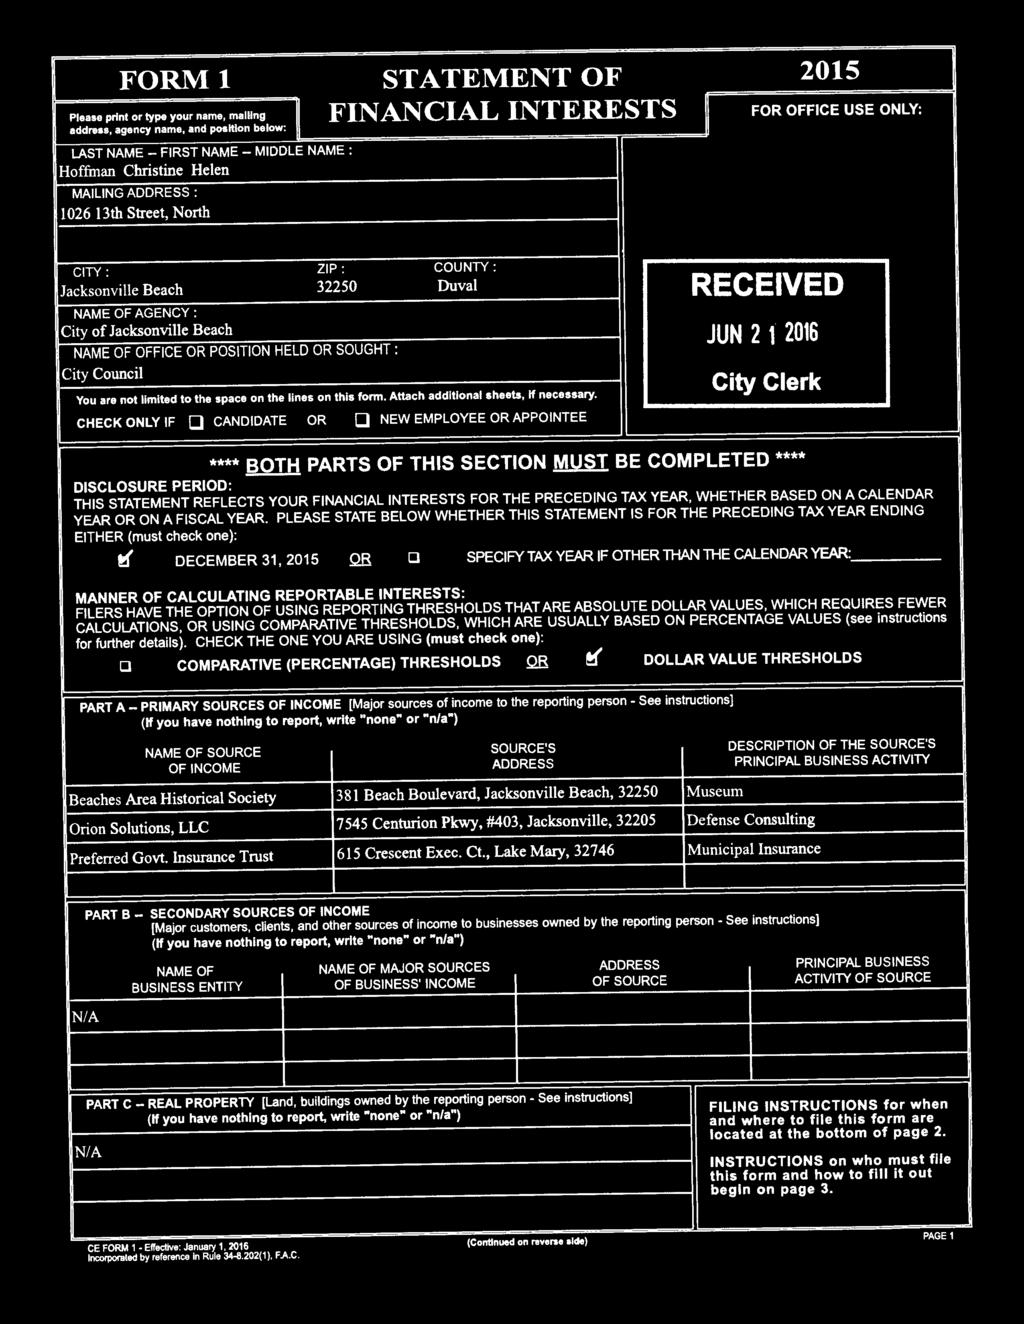 SOUGHT : City Council You are not limited to the space on the lines on this form. Attach additional sheets, if necessary.